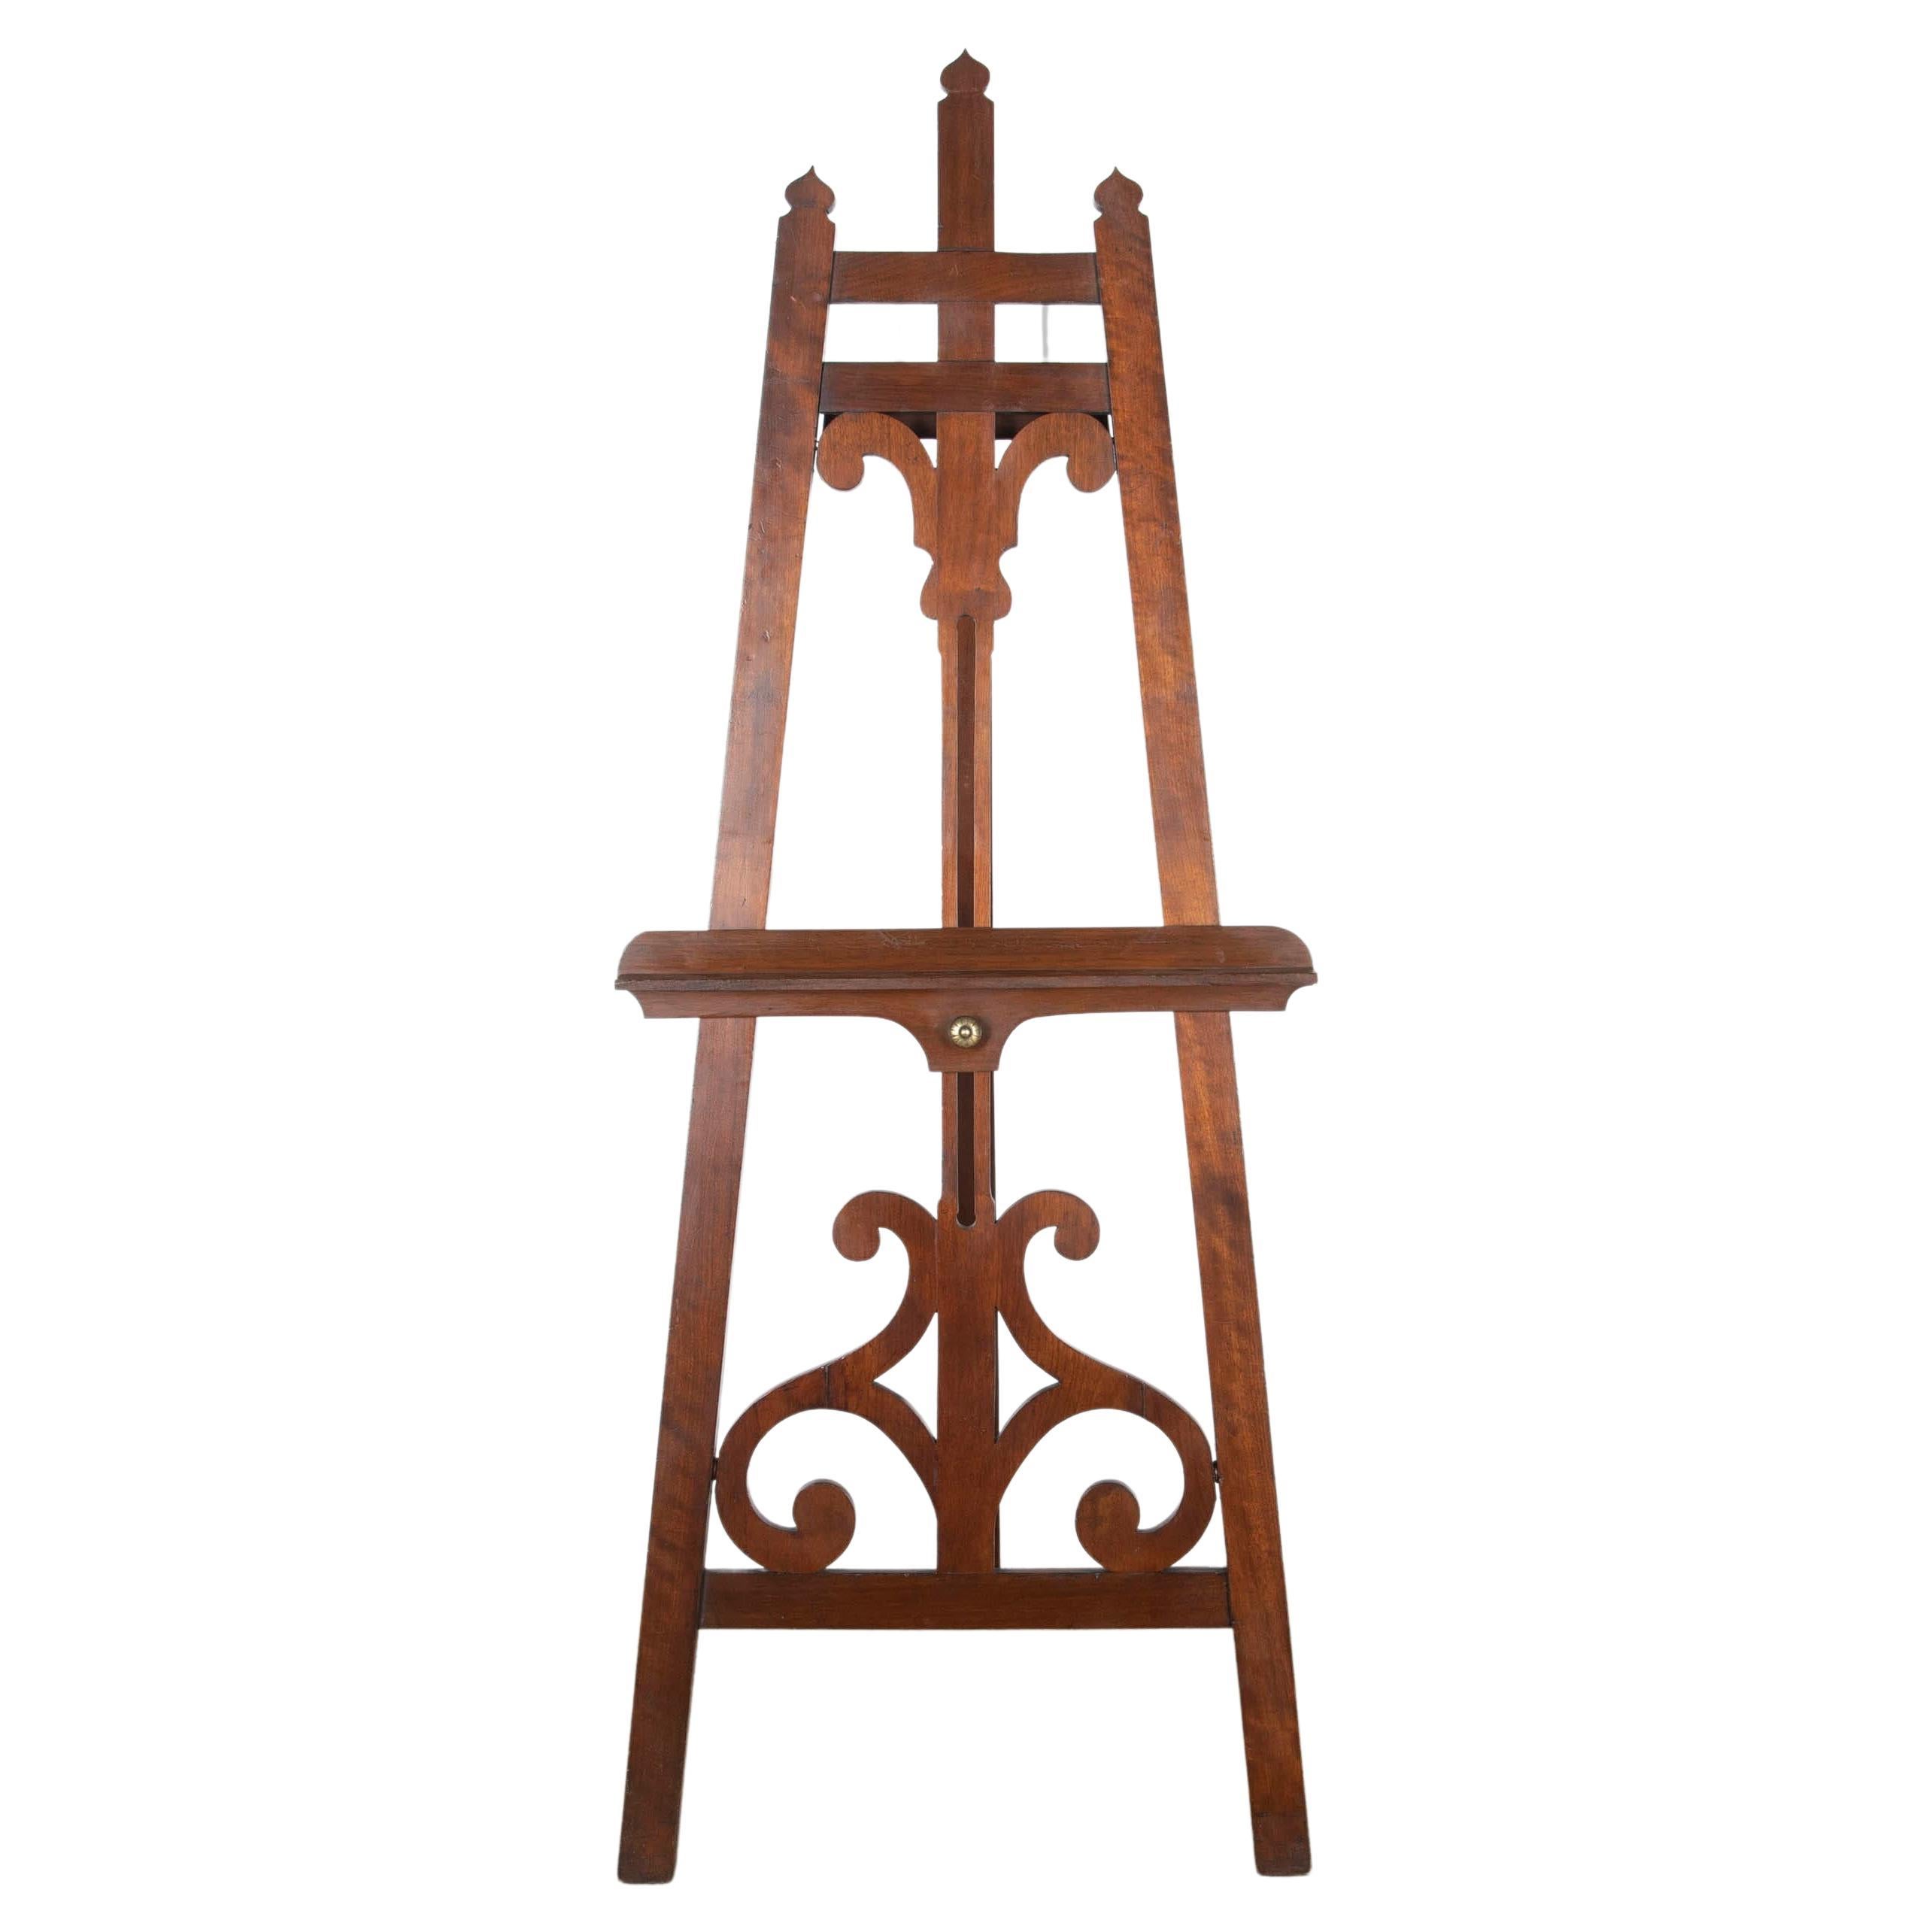 Early C19th Mahogany shapely Easel For Sale